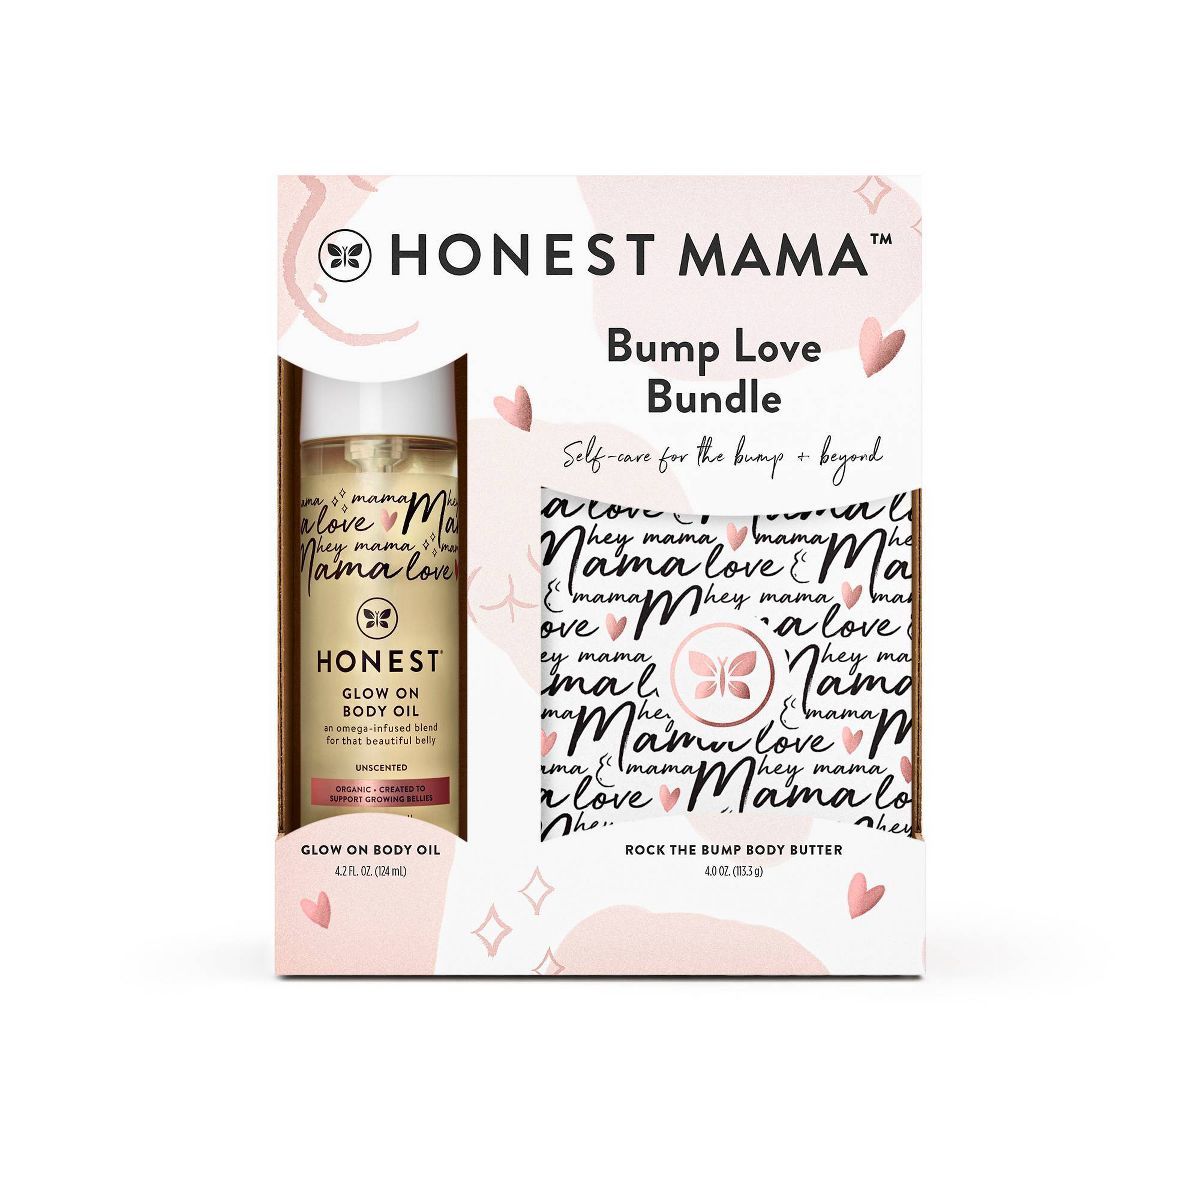 The Honest Company Honest Mama Body Butter + Body Oil Gift Set - 2ct | Target